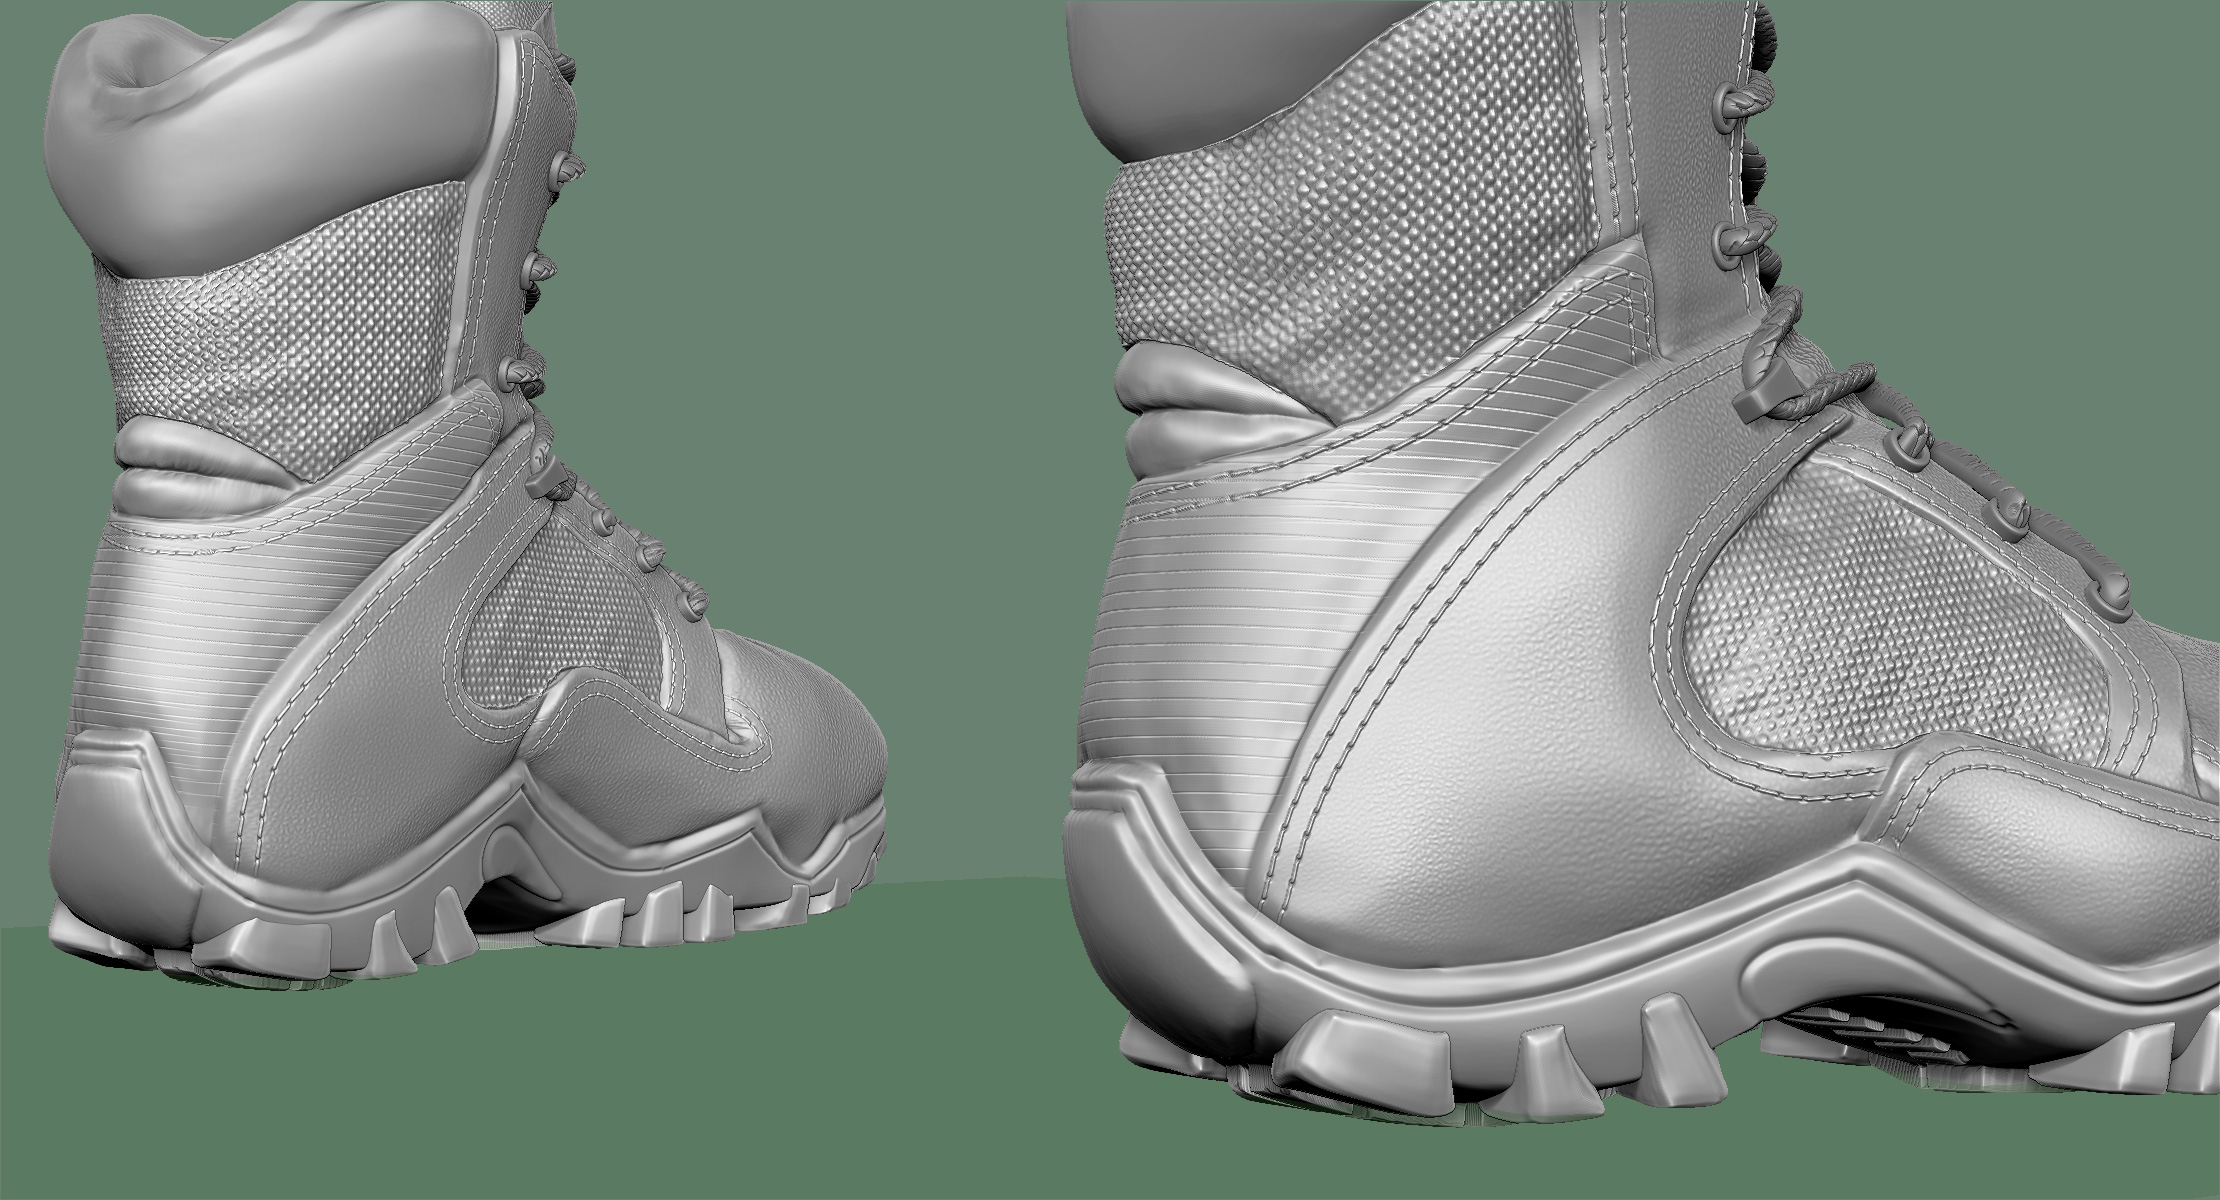 sculpting boots zbrush